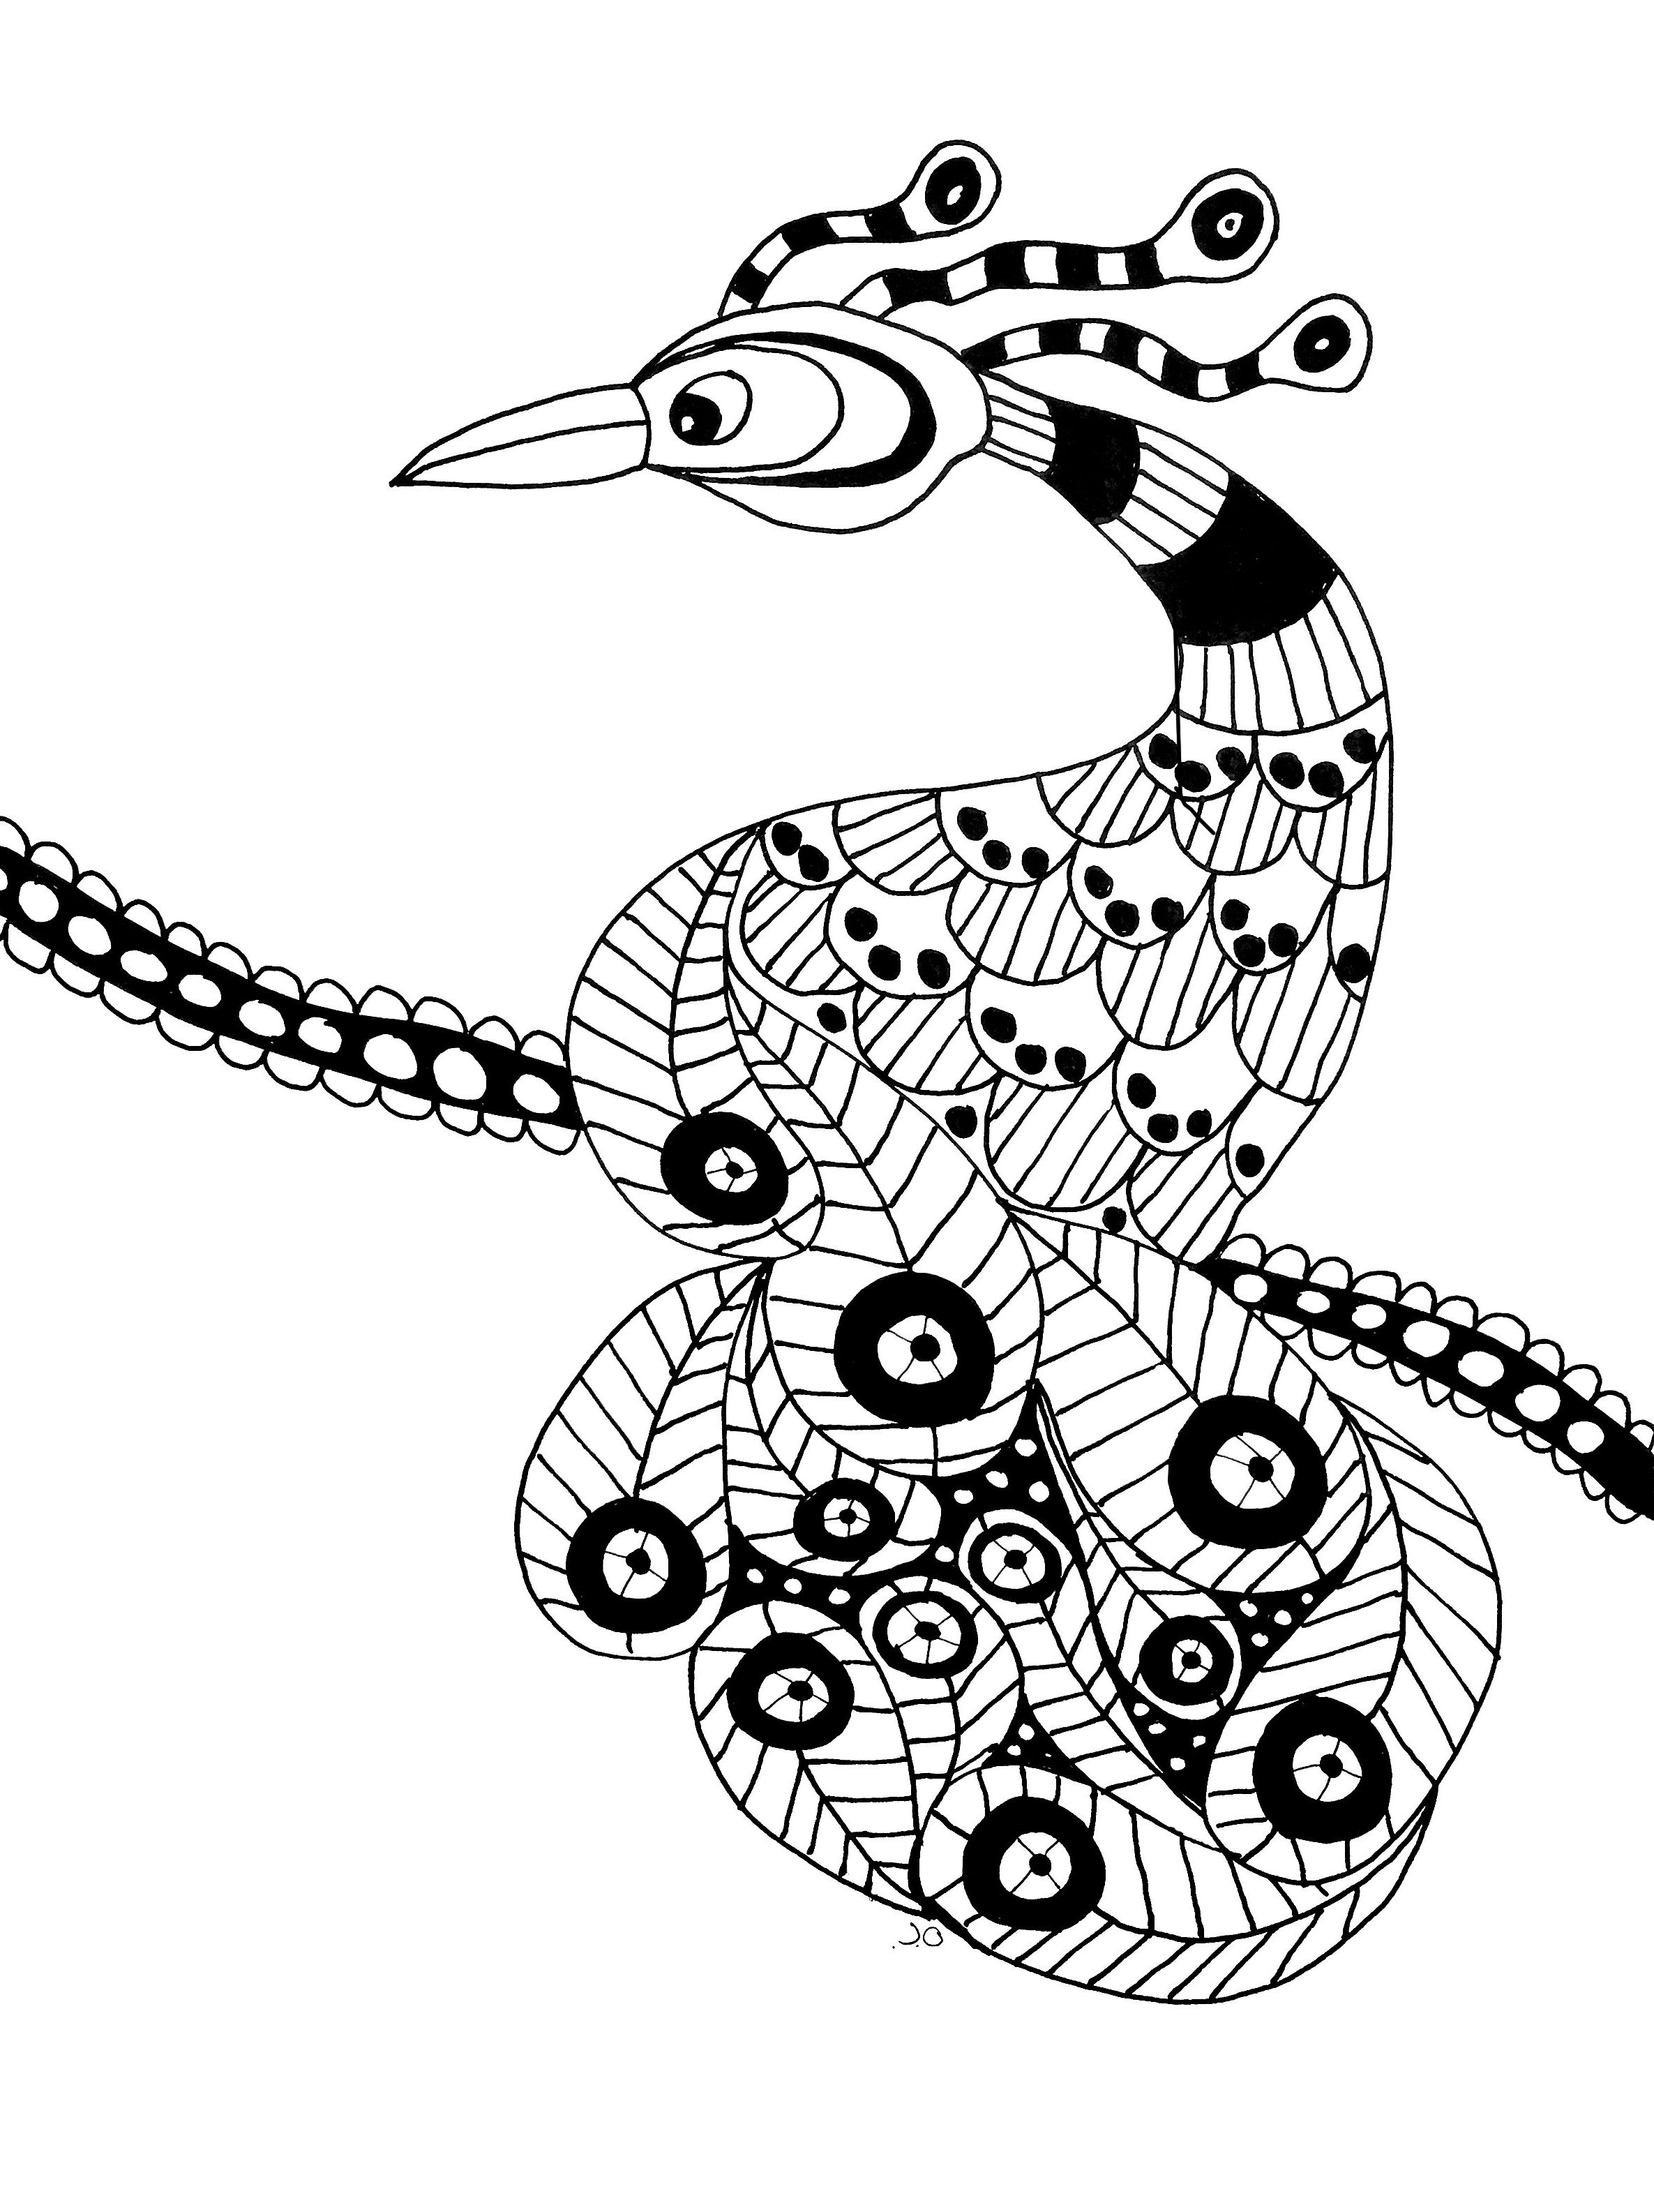 Bird Coloring Pages Mandala : Mandala Flowers Spring Coloring Pages